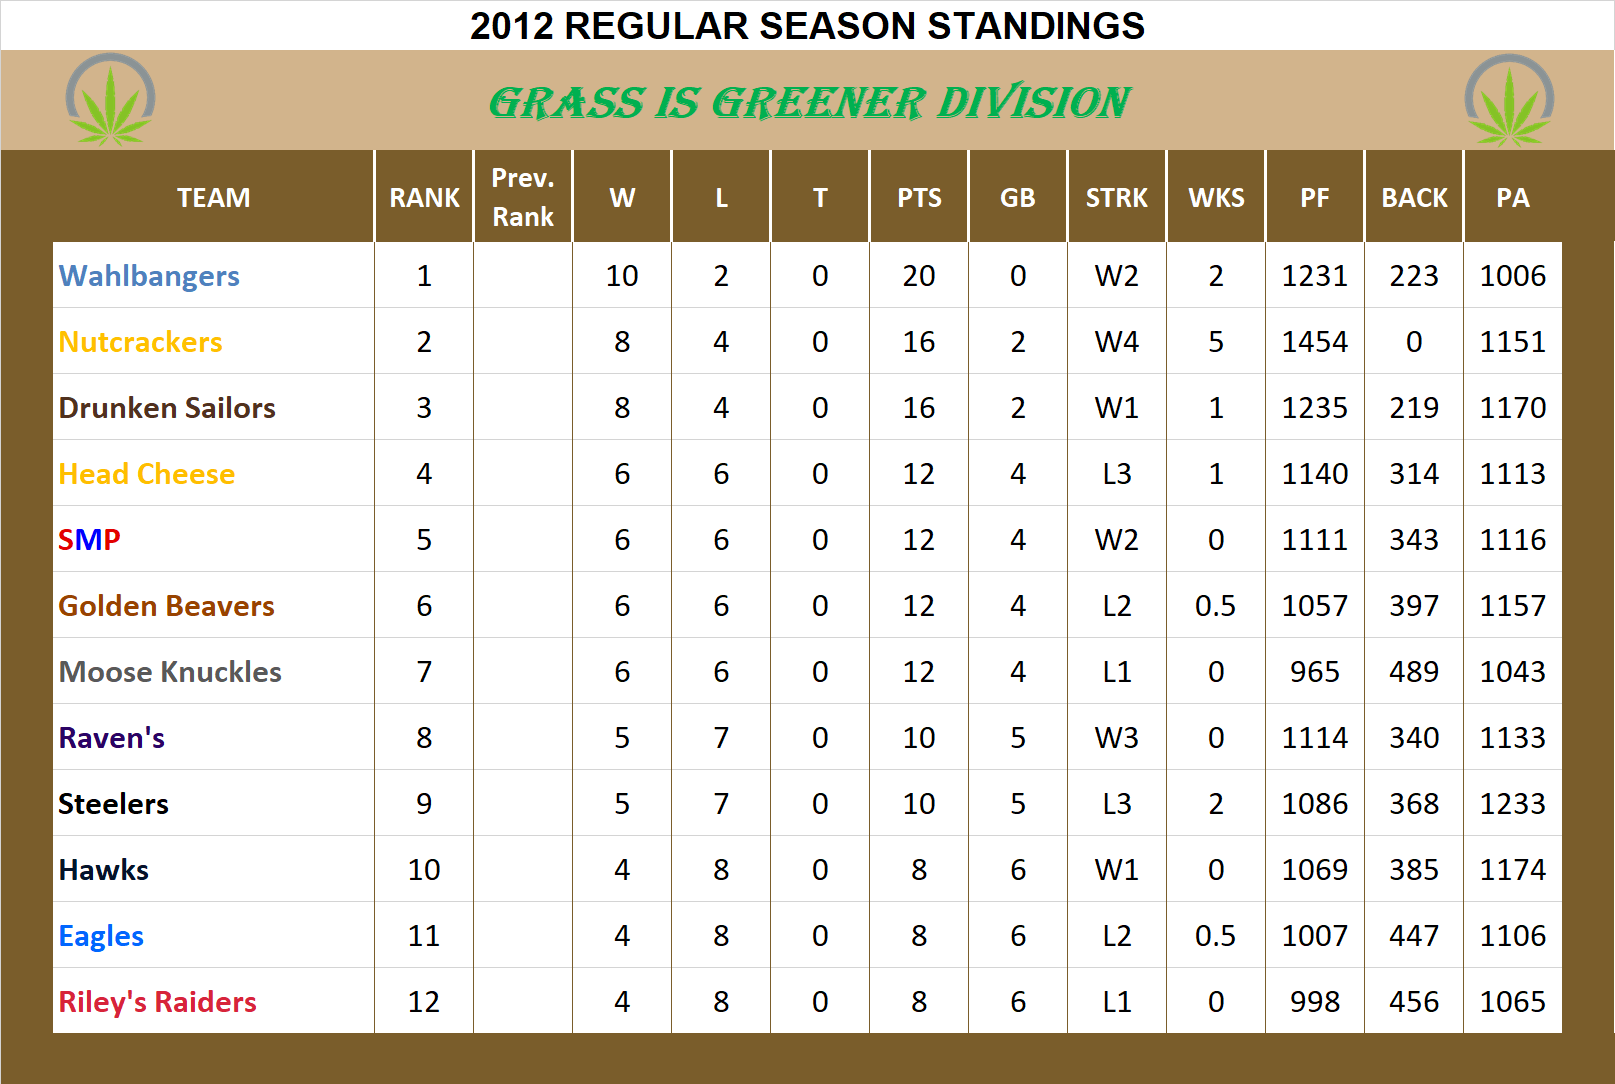 2012 Grass is Greener Division Standings